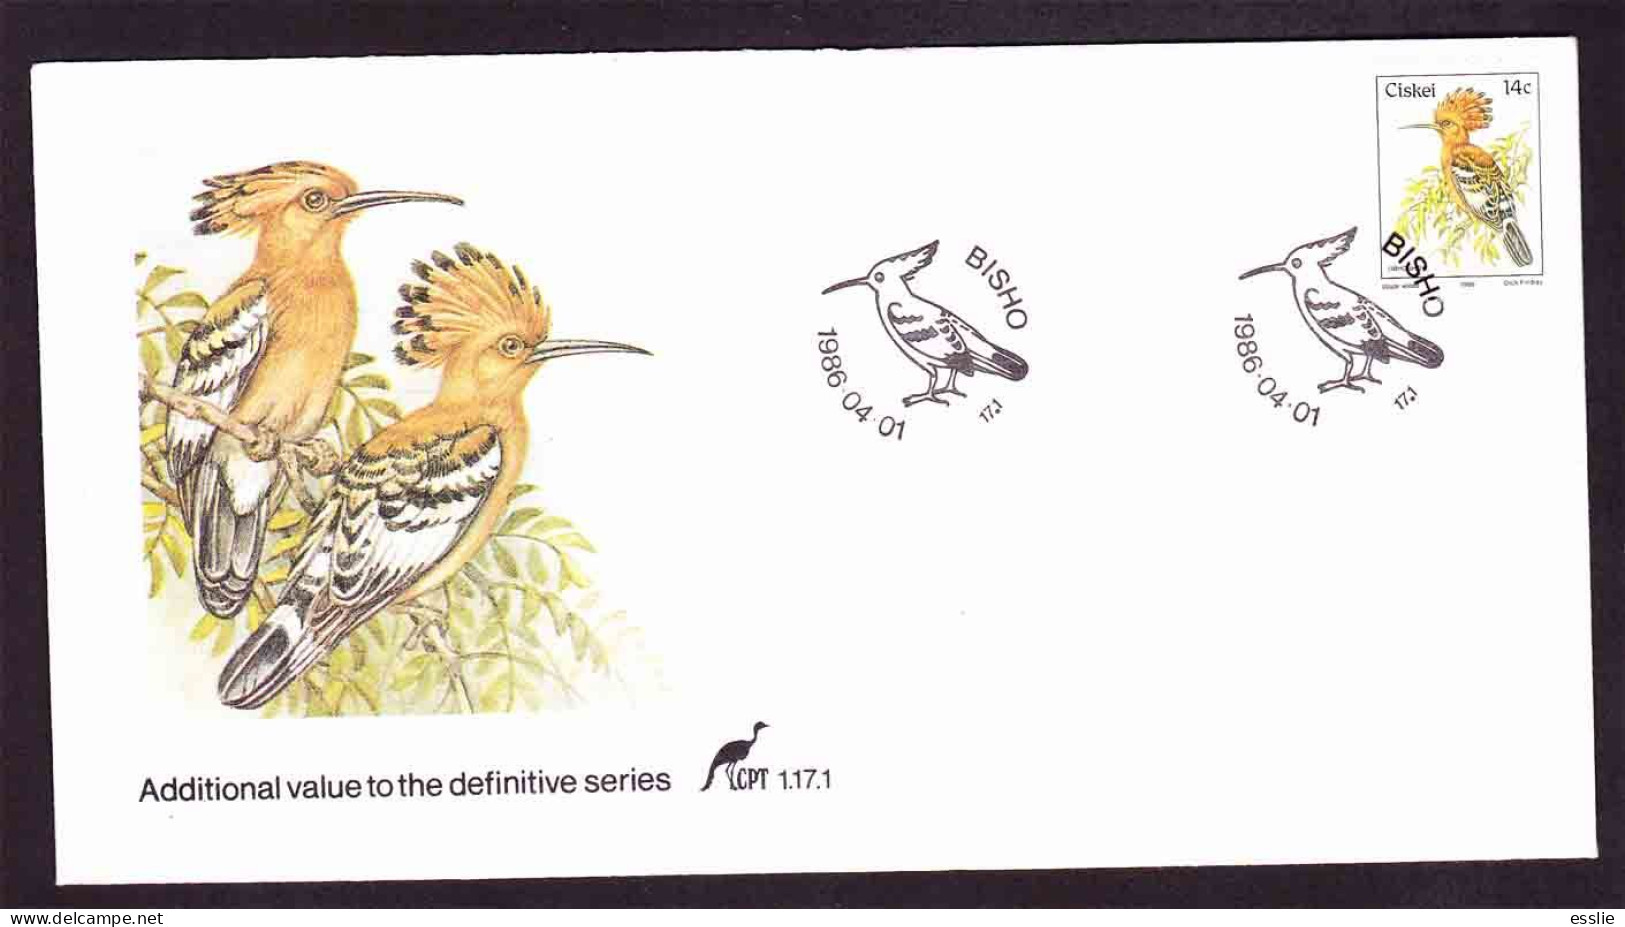 Ciskei - 1986 (1981) - Birds First Definitive - Additional Value - Hoopoe - First Day Cover - Small - Cuckoos & Turacos